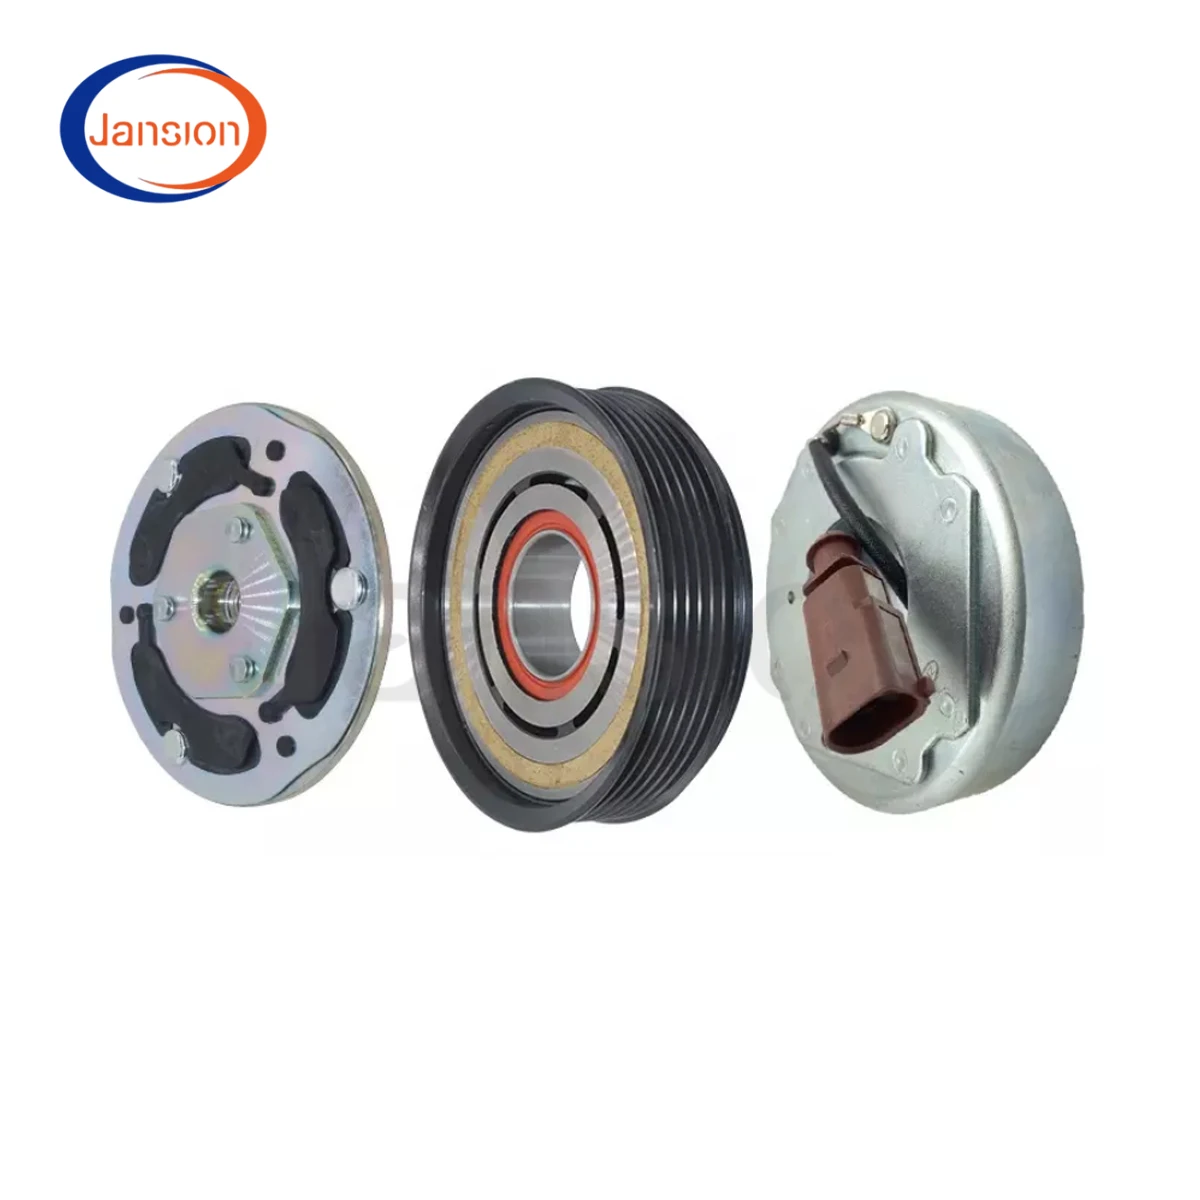 

AC A/C Air Conditioning Compressor Clutch Pulley 6SAS14C For Audi A4 A5 Q5 2.0 8T0260805F 447280-7032 4472808820